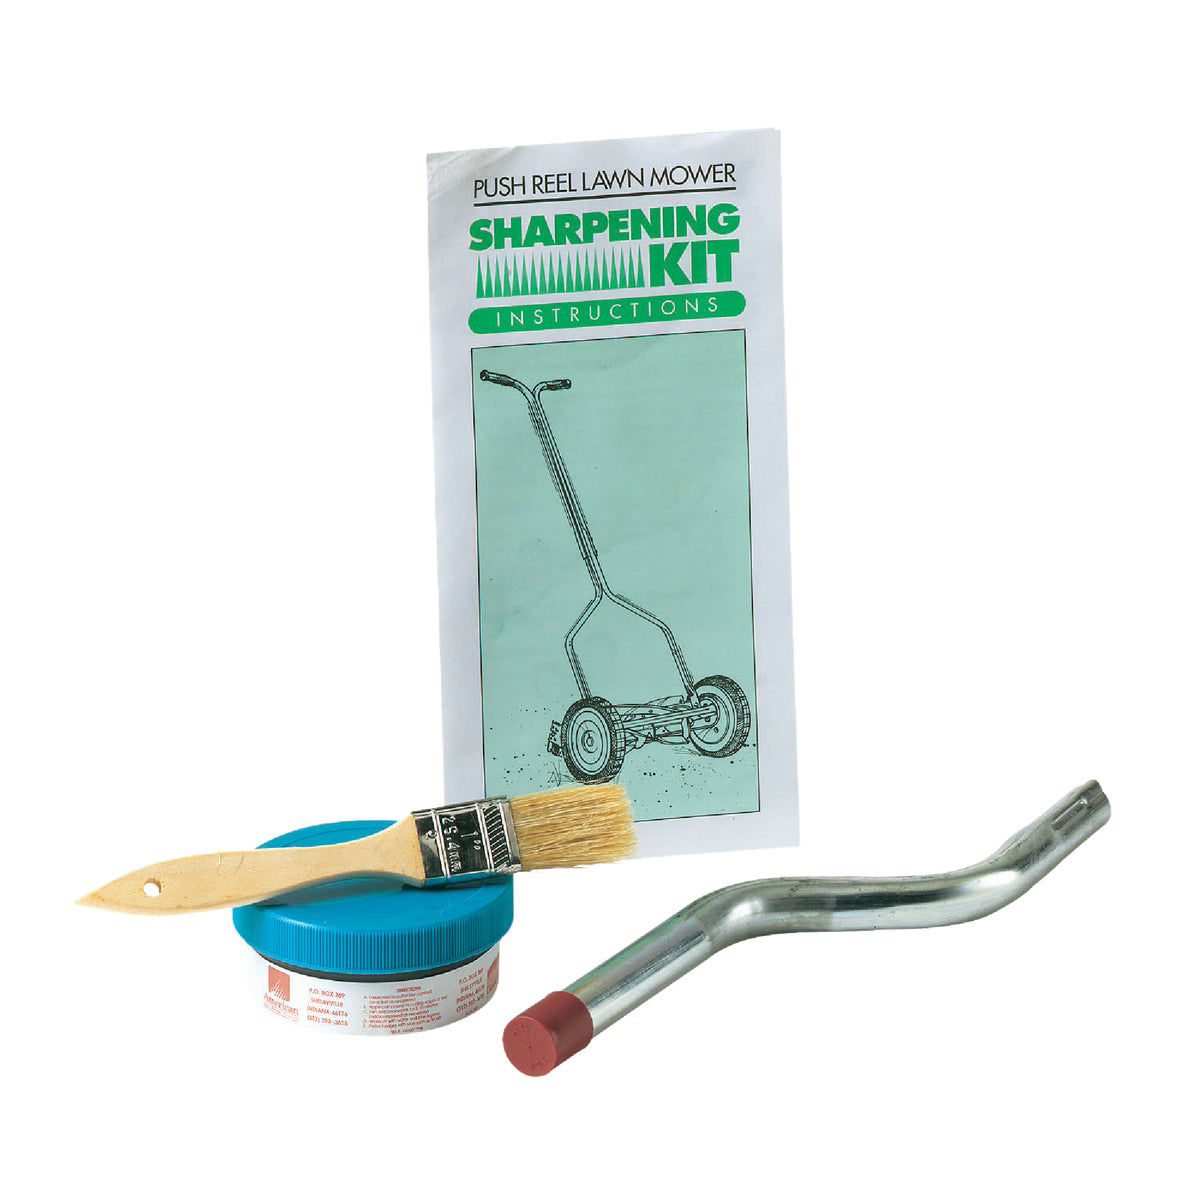 American Lawn Mower Company SK-1 Sharpening Kit, 60% OFF